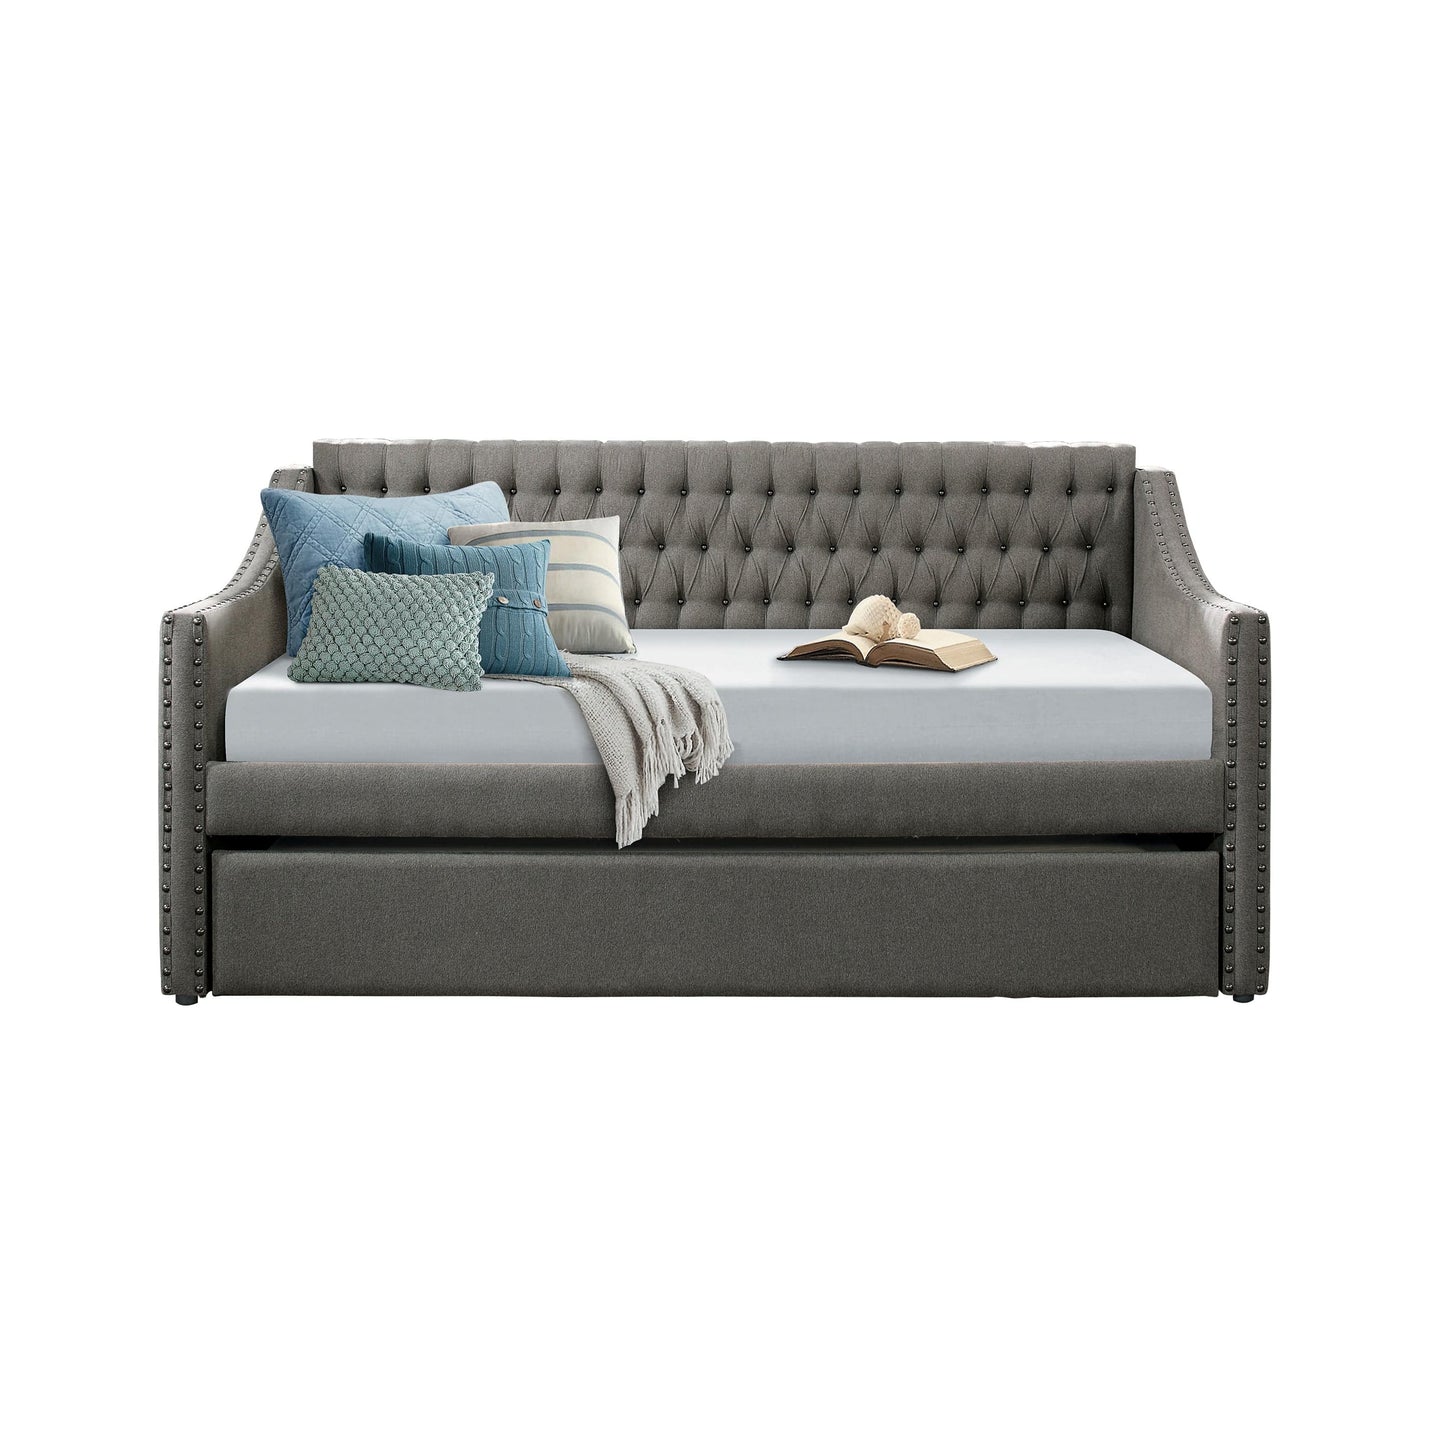 Modern Design Dark Gray Fabric Upholstered 1pc Sofa Bed w Trundle Button-Tufted Detail Nailhead Trim Day Bed